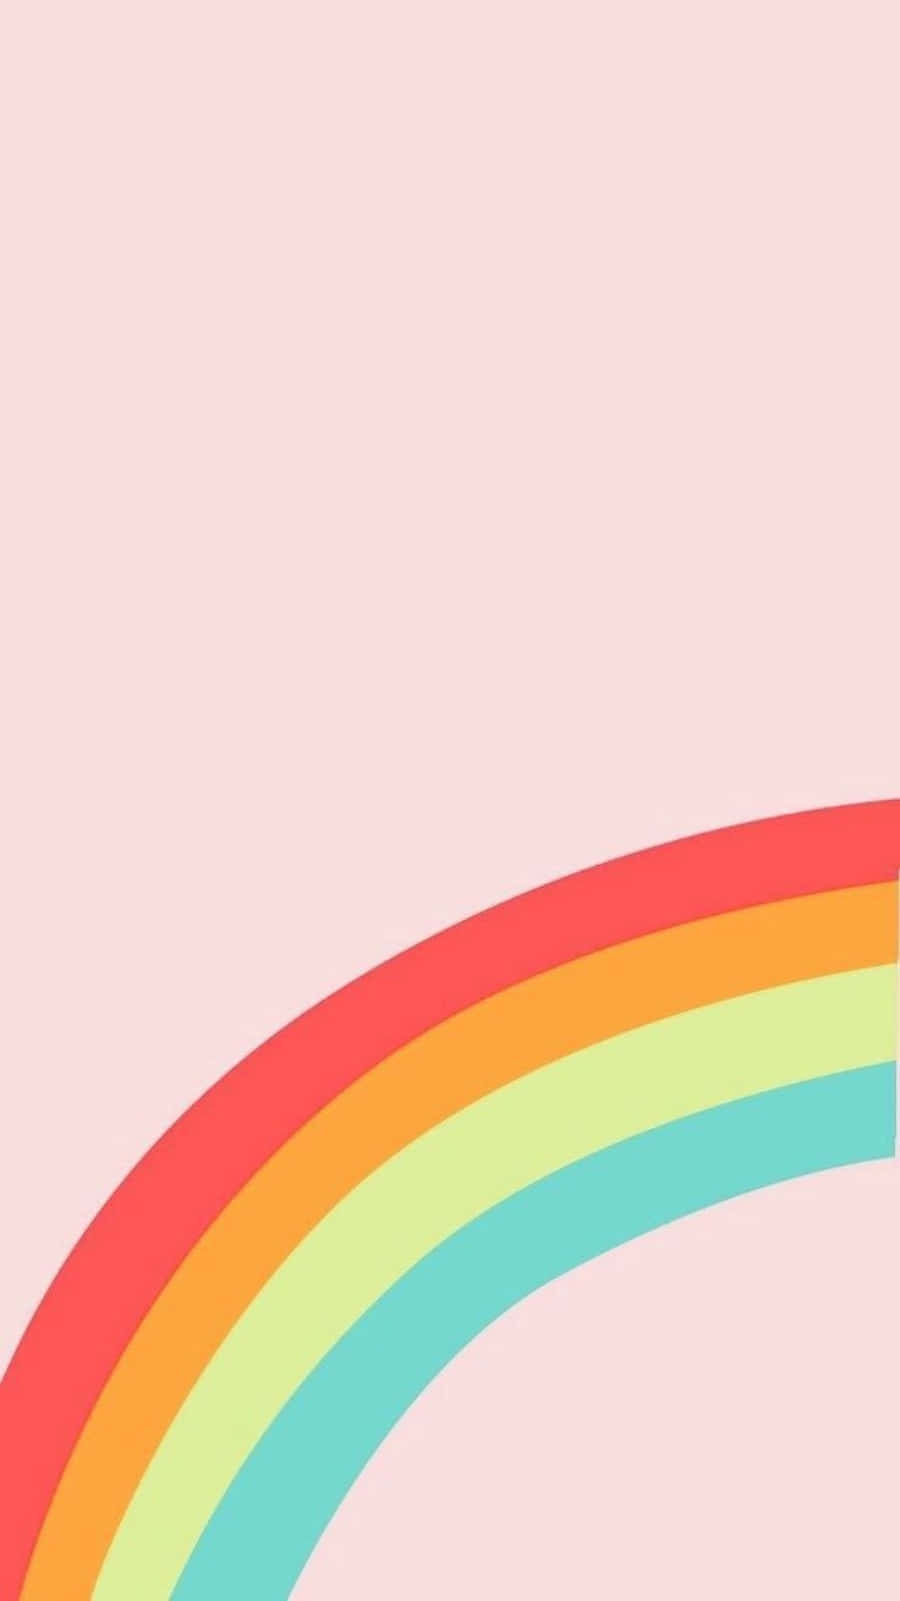 Colorful Aesthetic Rainbow On Pink Wallpaper